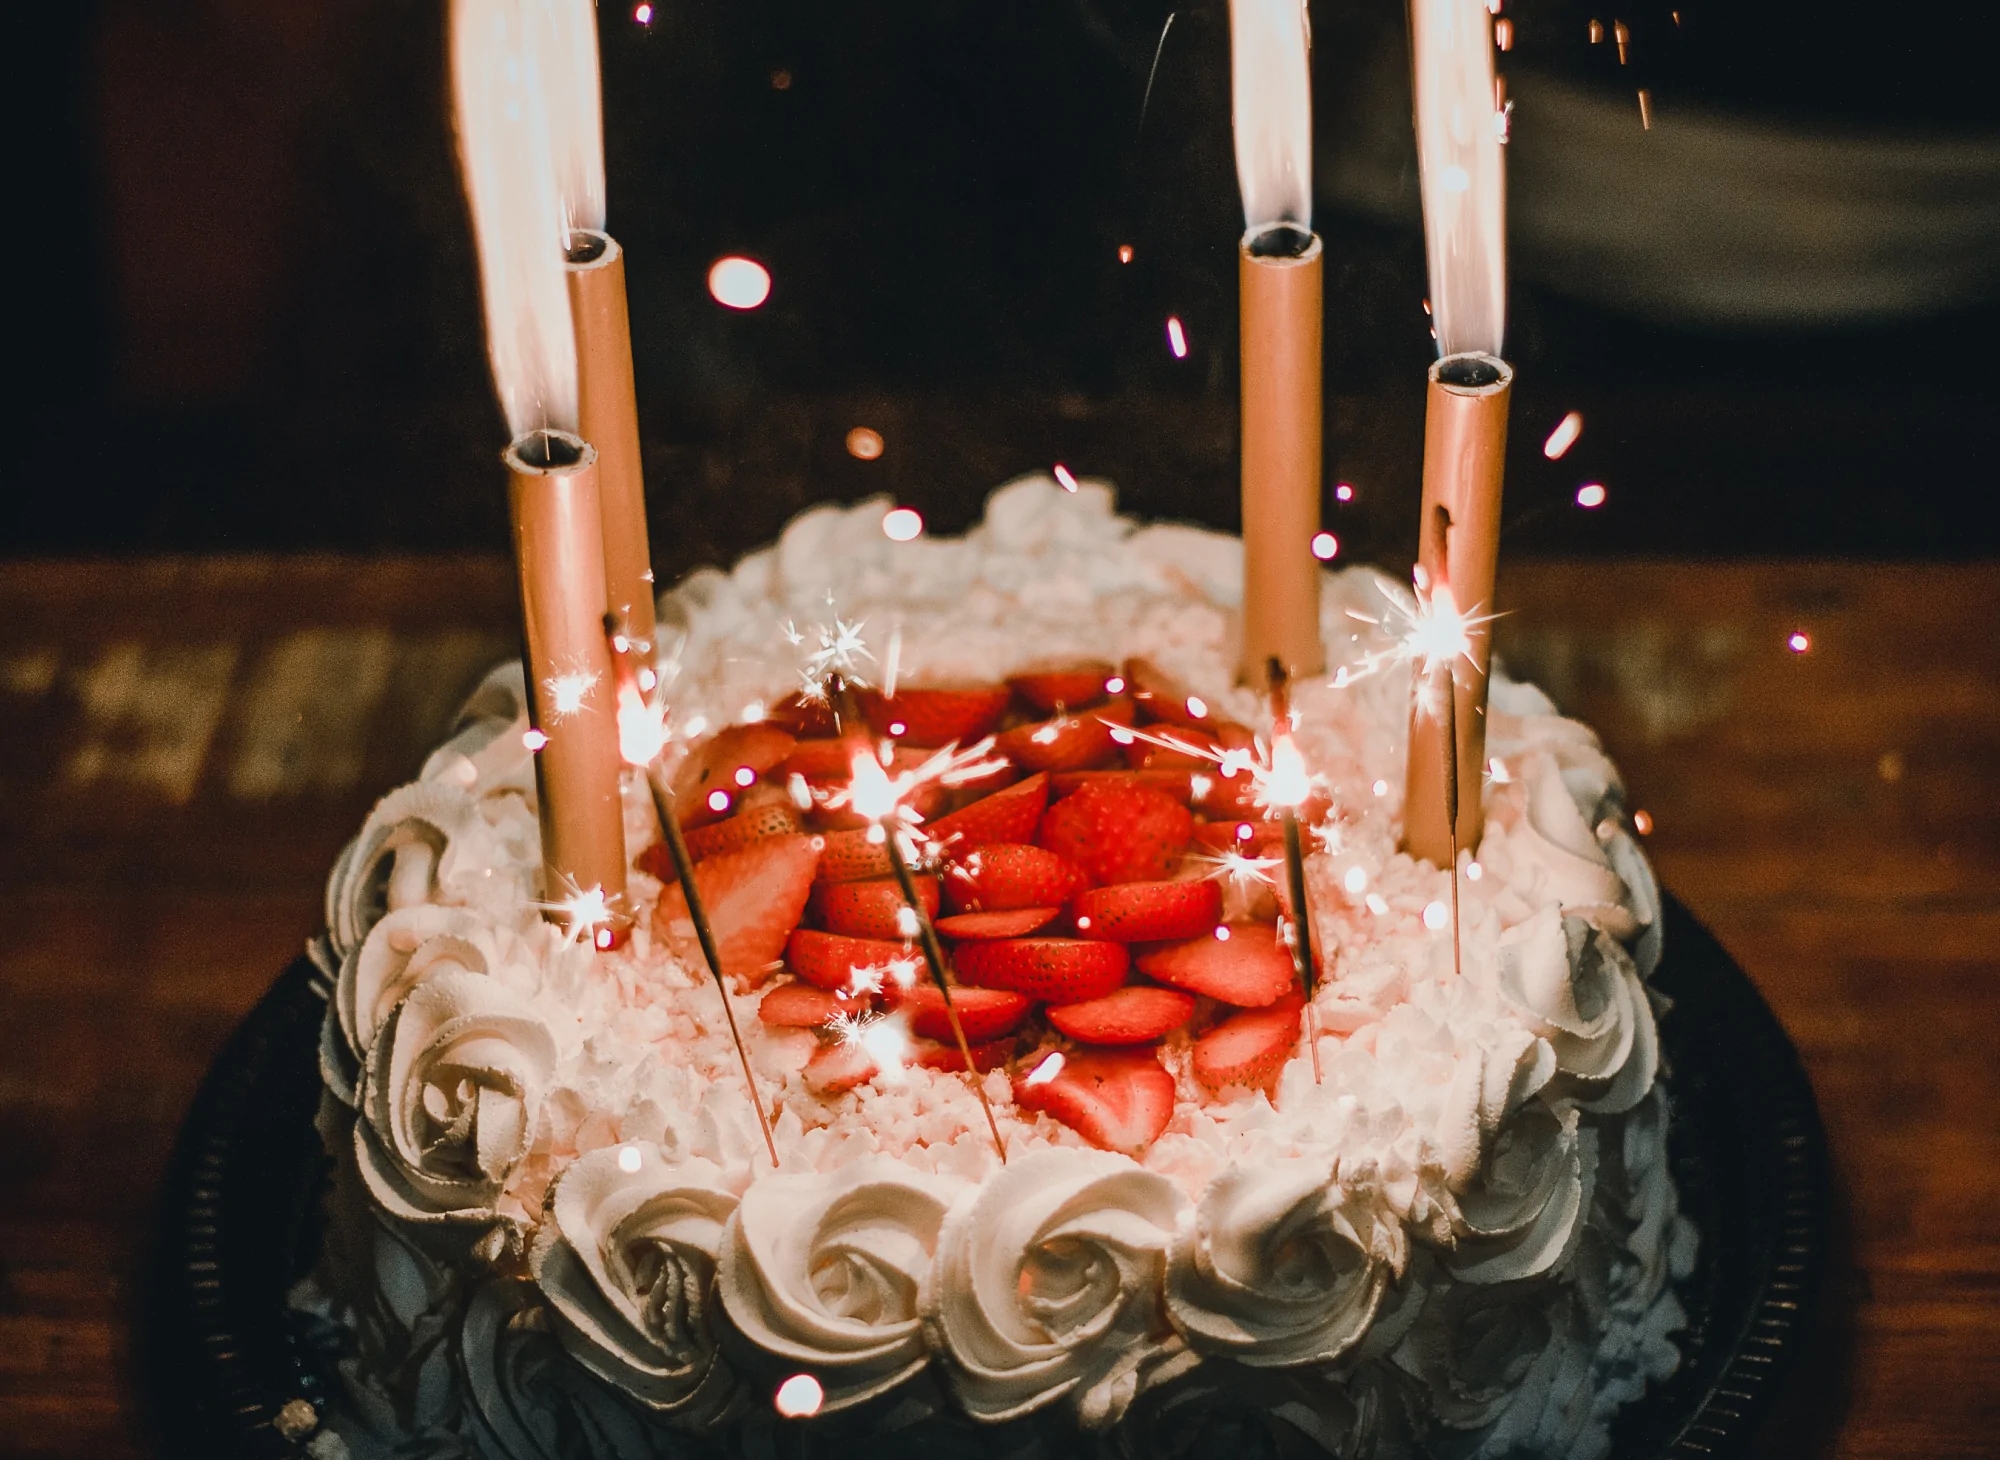 A cake with strawberry slices and white cream flowers and is decorated with candles